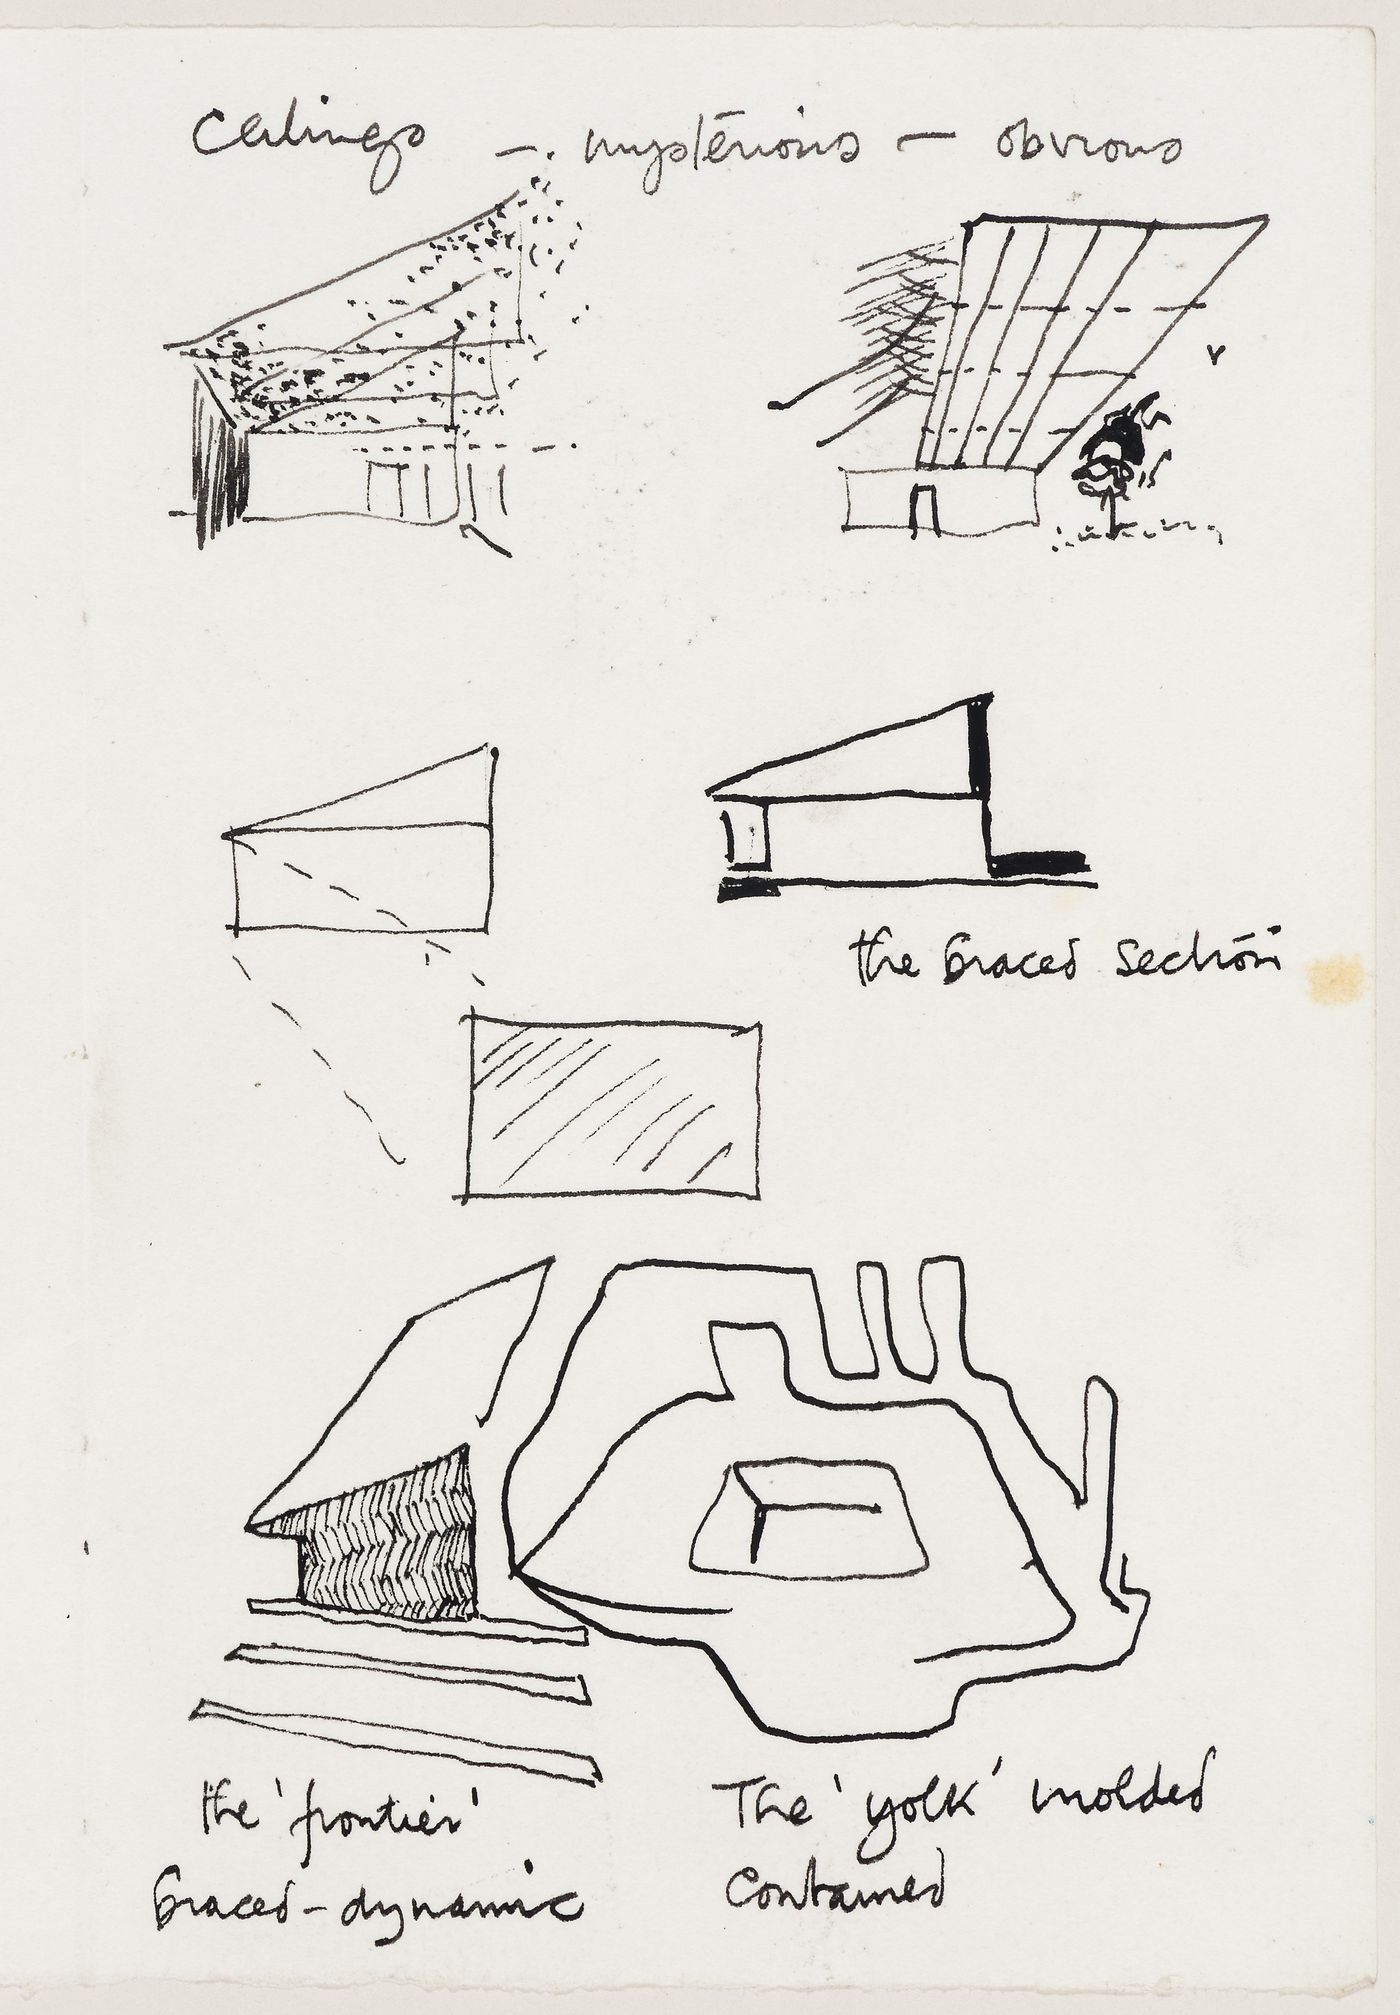 Perthut House: conceptual sketches (ceilings, the "braced section", the "frontier", the "yolk")